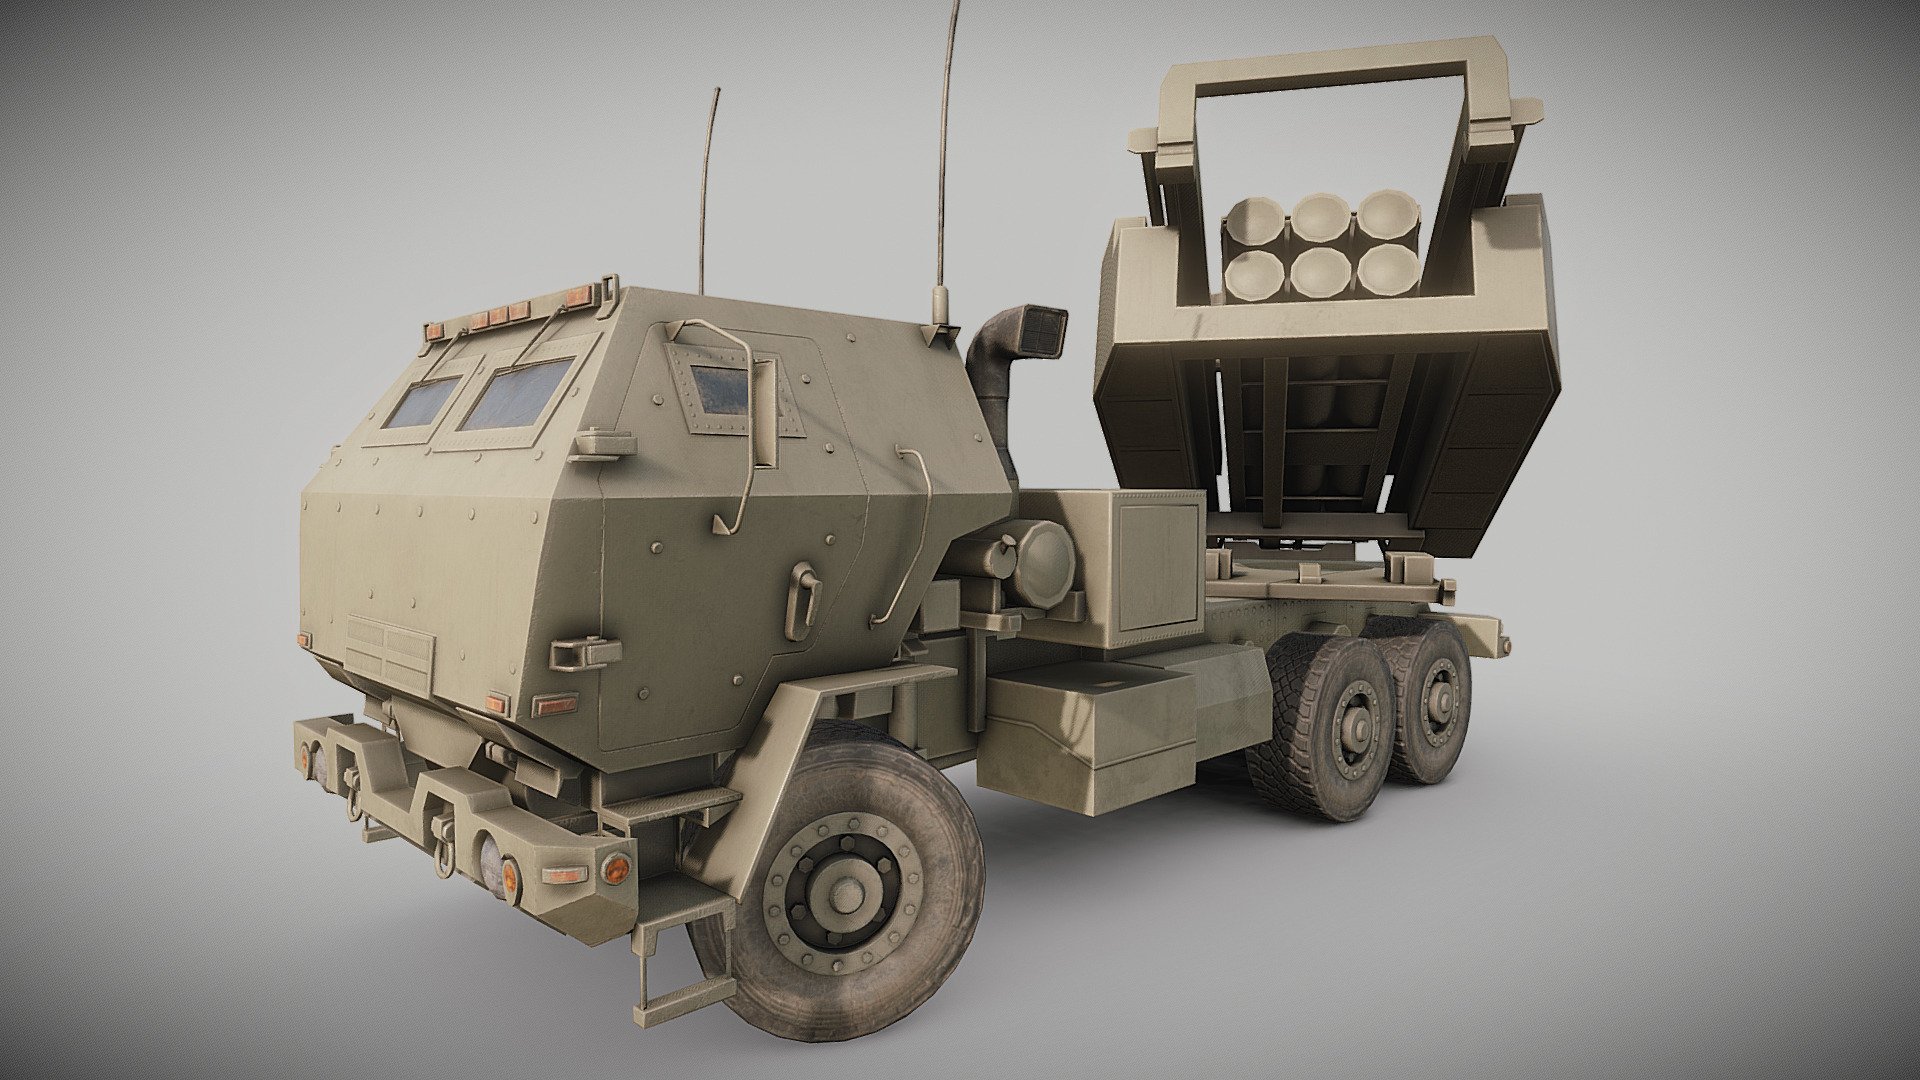 The M142 High Mobility Artillery Rocket System (HIMARS) is a light multiple rocket launcher developed in the late 1990s for the United States Army and mounted on a standard U.S. Army M1140 truck frame.

Includes woodland paint version 3d model